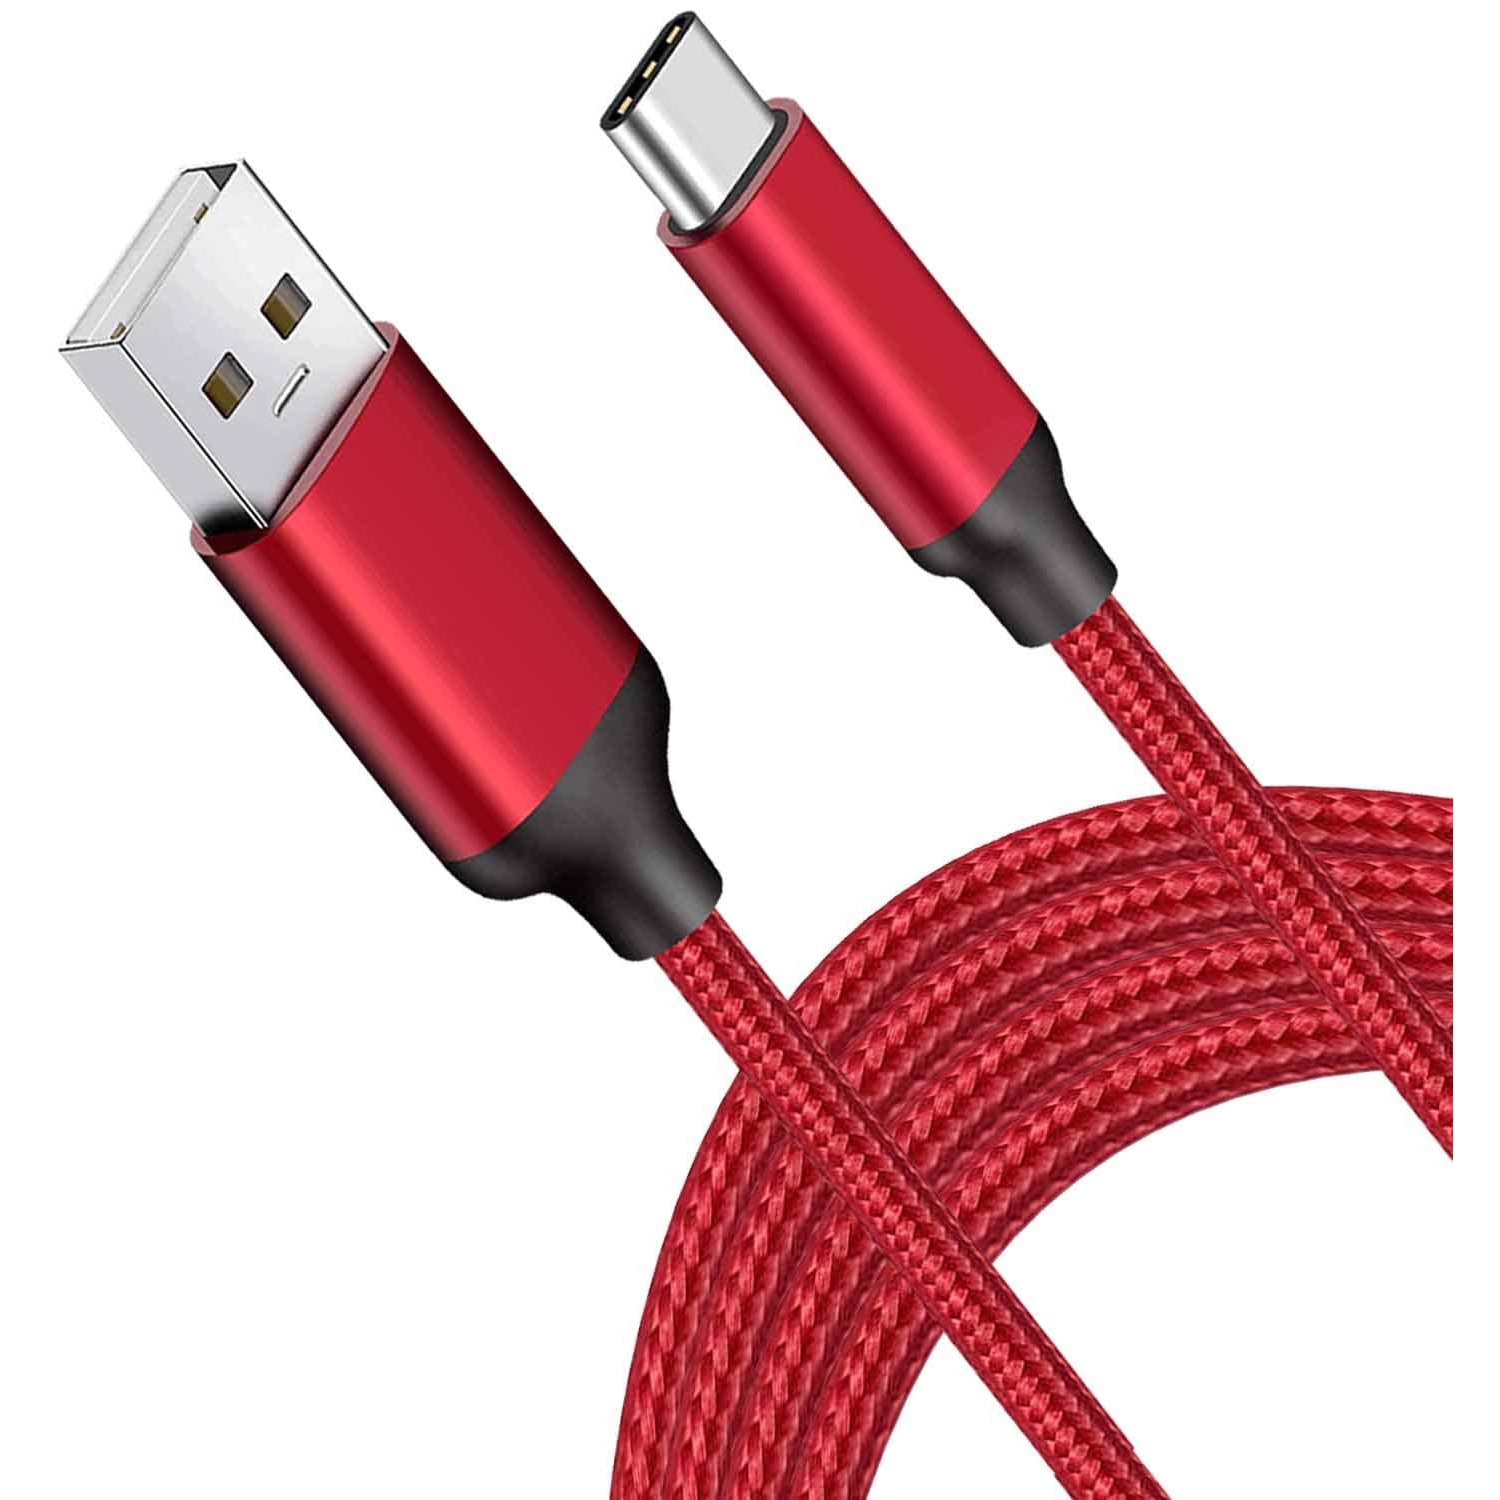 10FT USB Type C Cable,Fast Charging,Long Charger Cord for Samsung Galaxy Note 10,S10 Plus,A01 A20 A50 A71 A51,LG Stylo